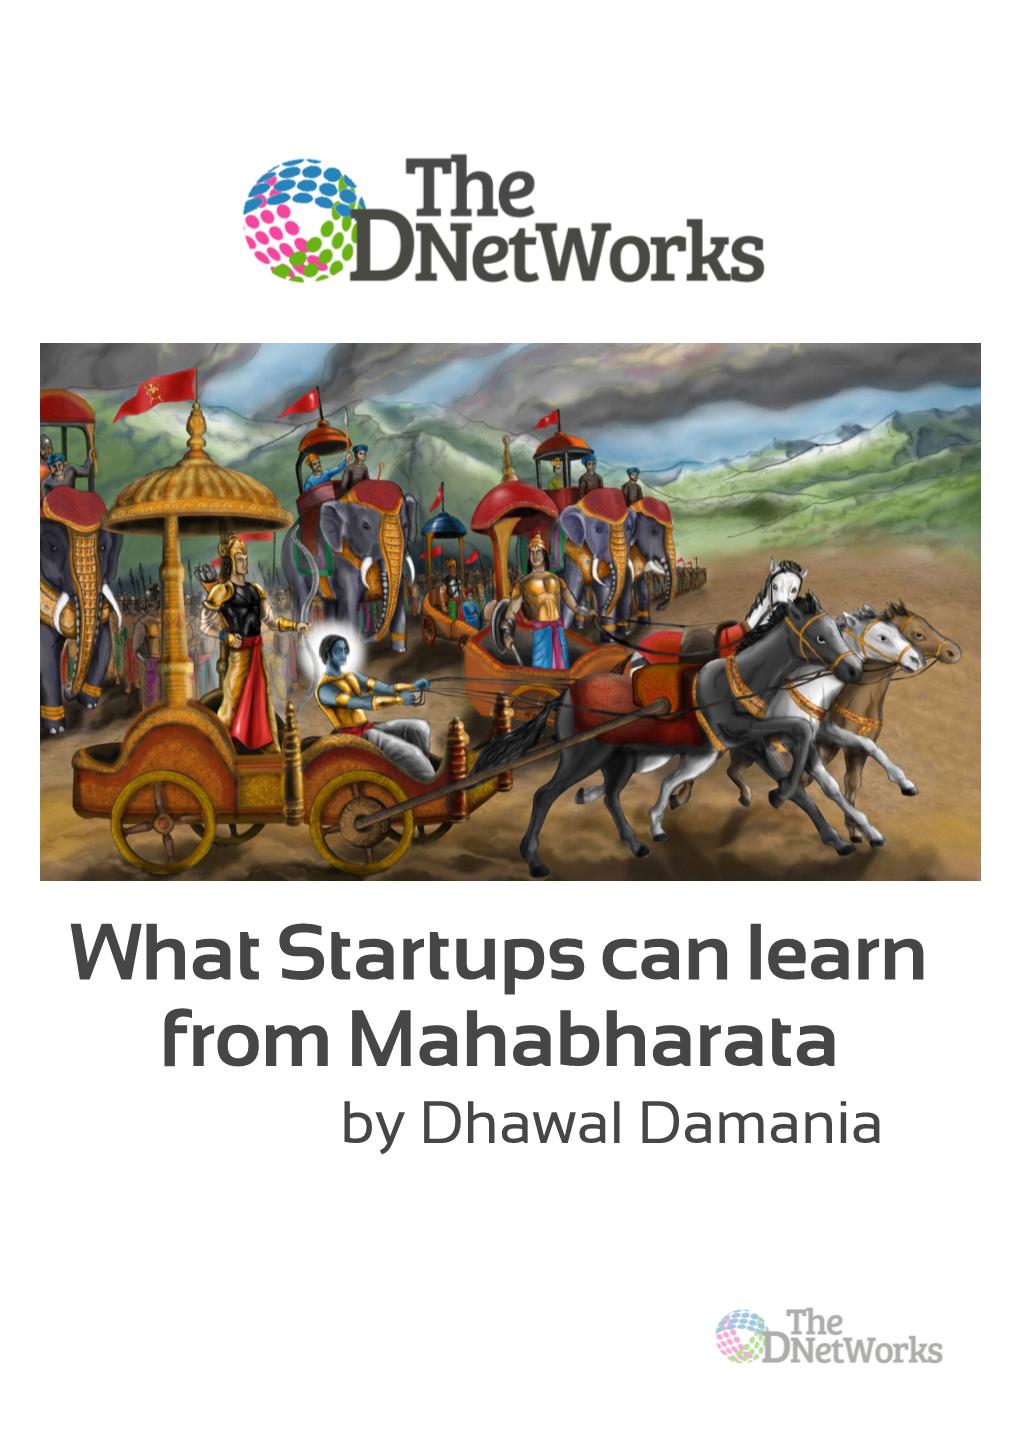 What Startups Can Learn from Mahabharata